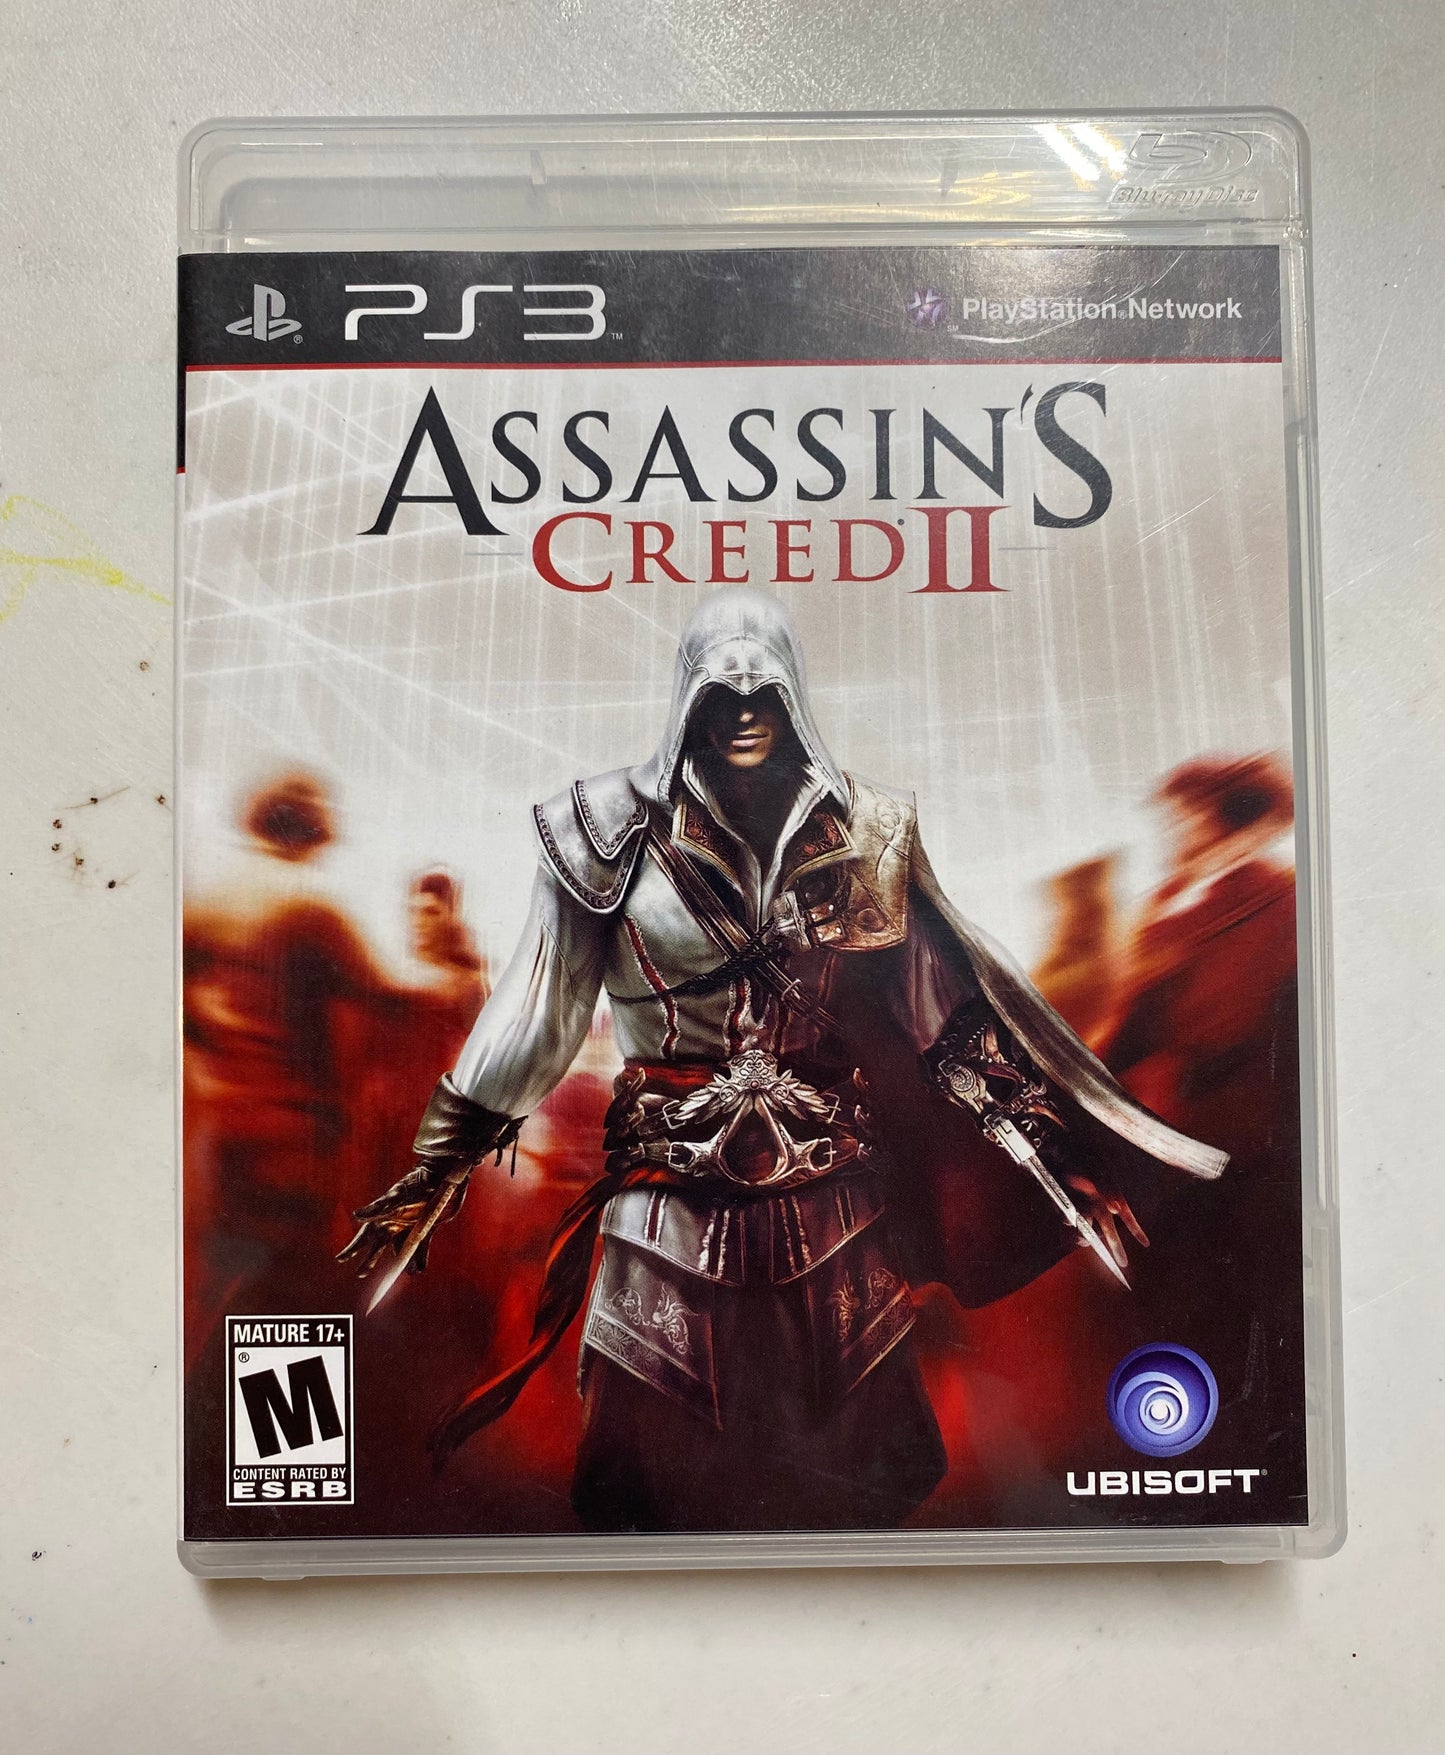 Assassin’s Creed 2 PlayStation 3 Game 34534-15